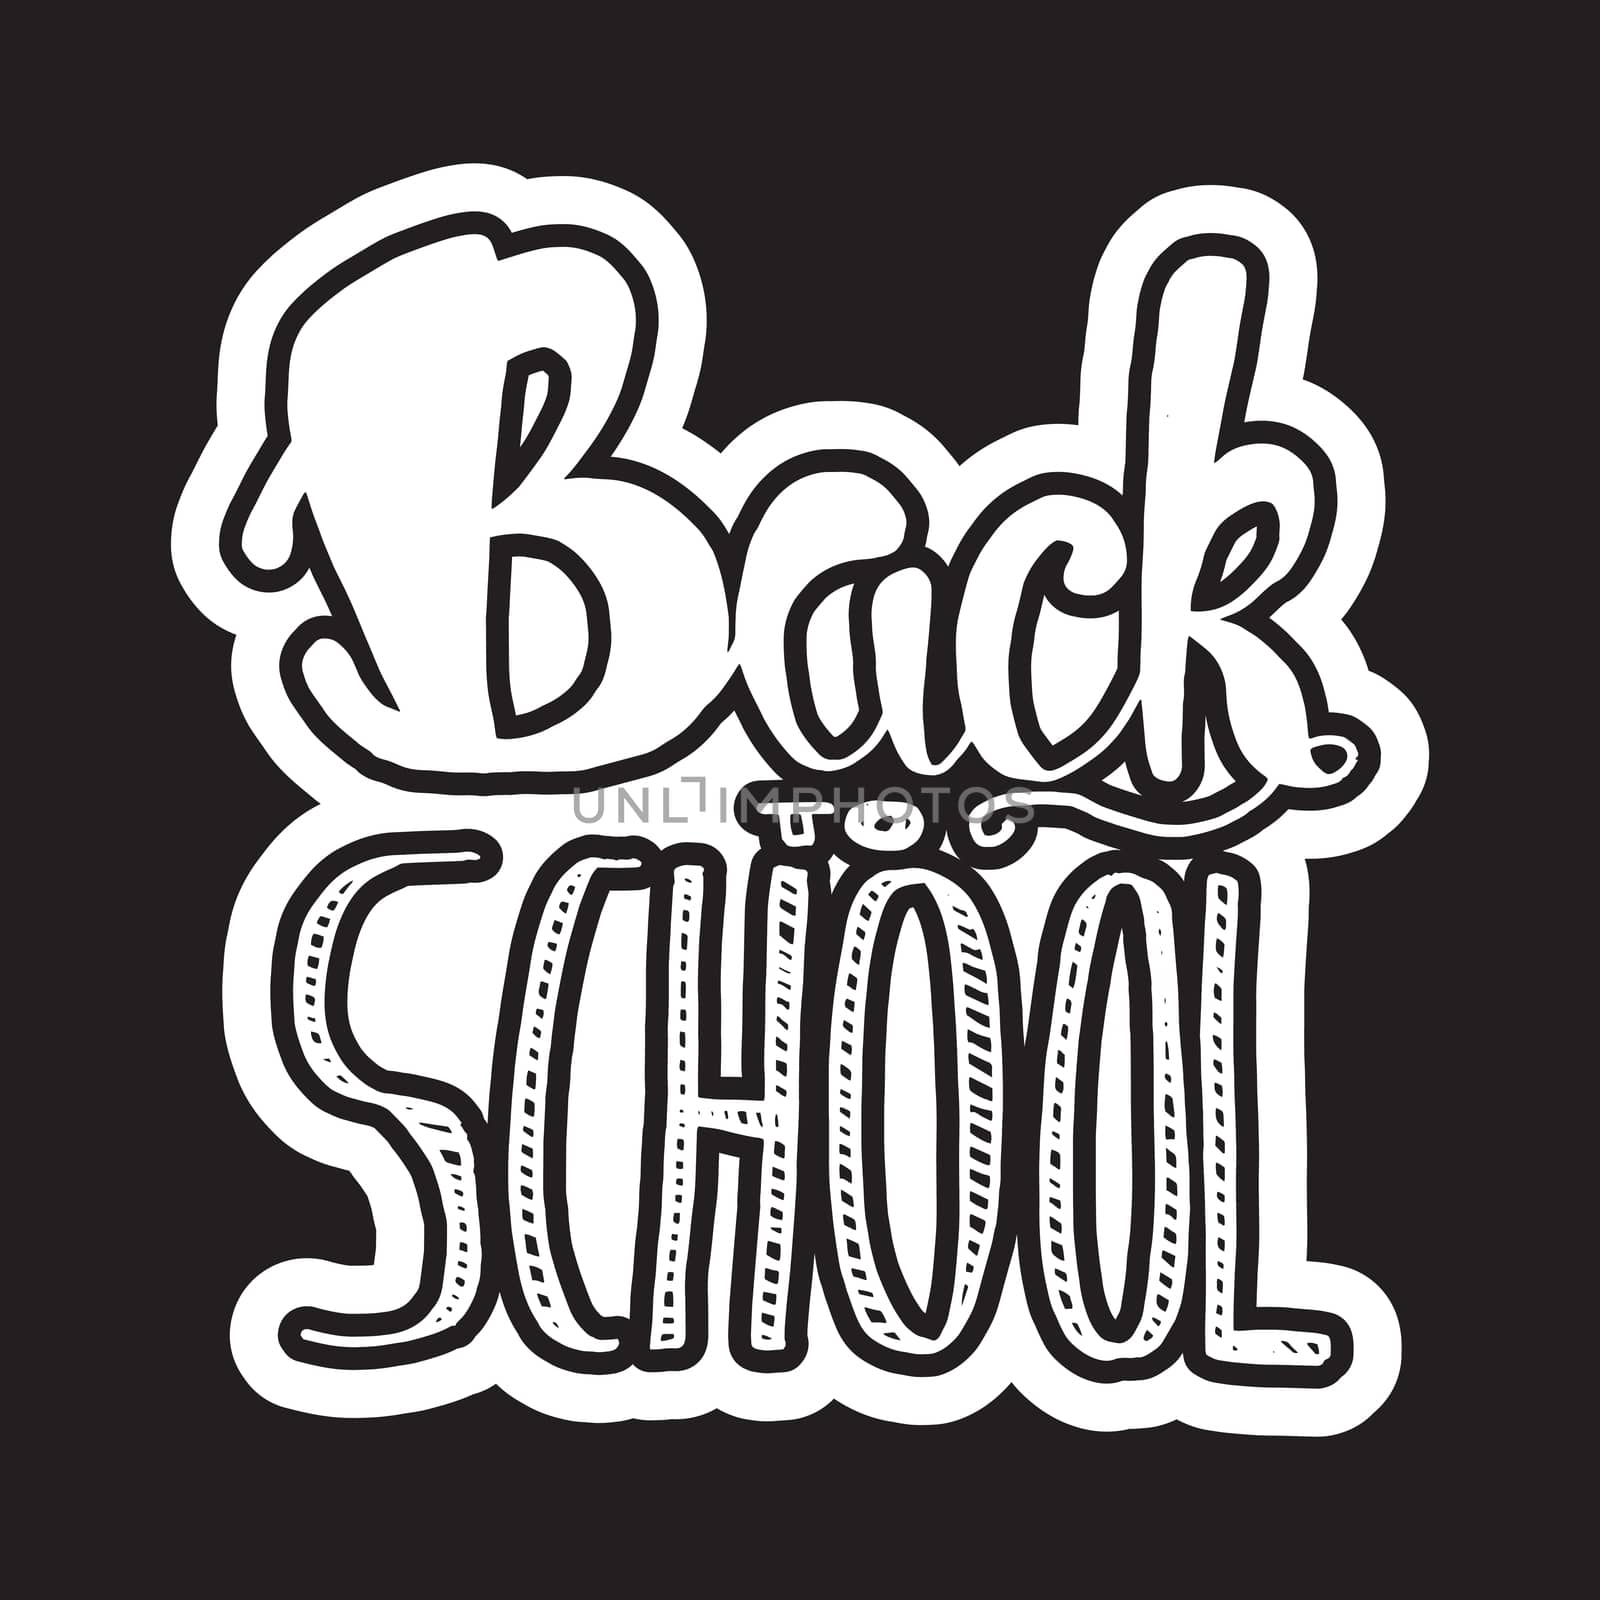 Vintage Back To School Lettering Banner. Knowledge day poster. Vector